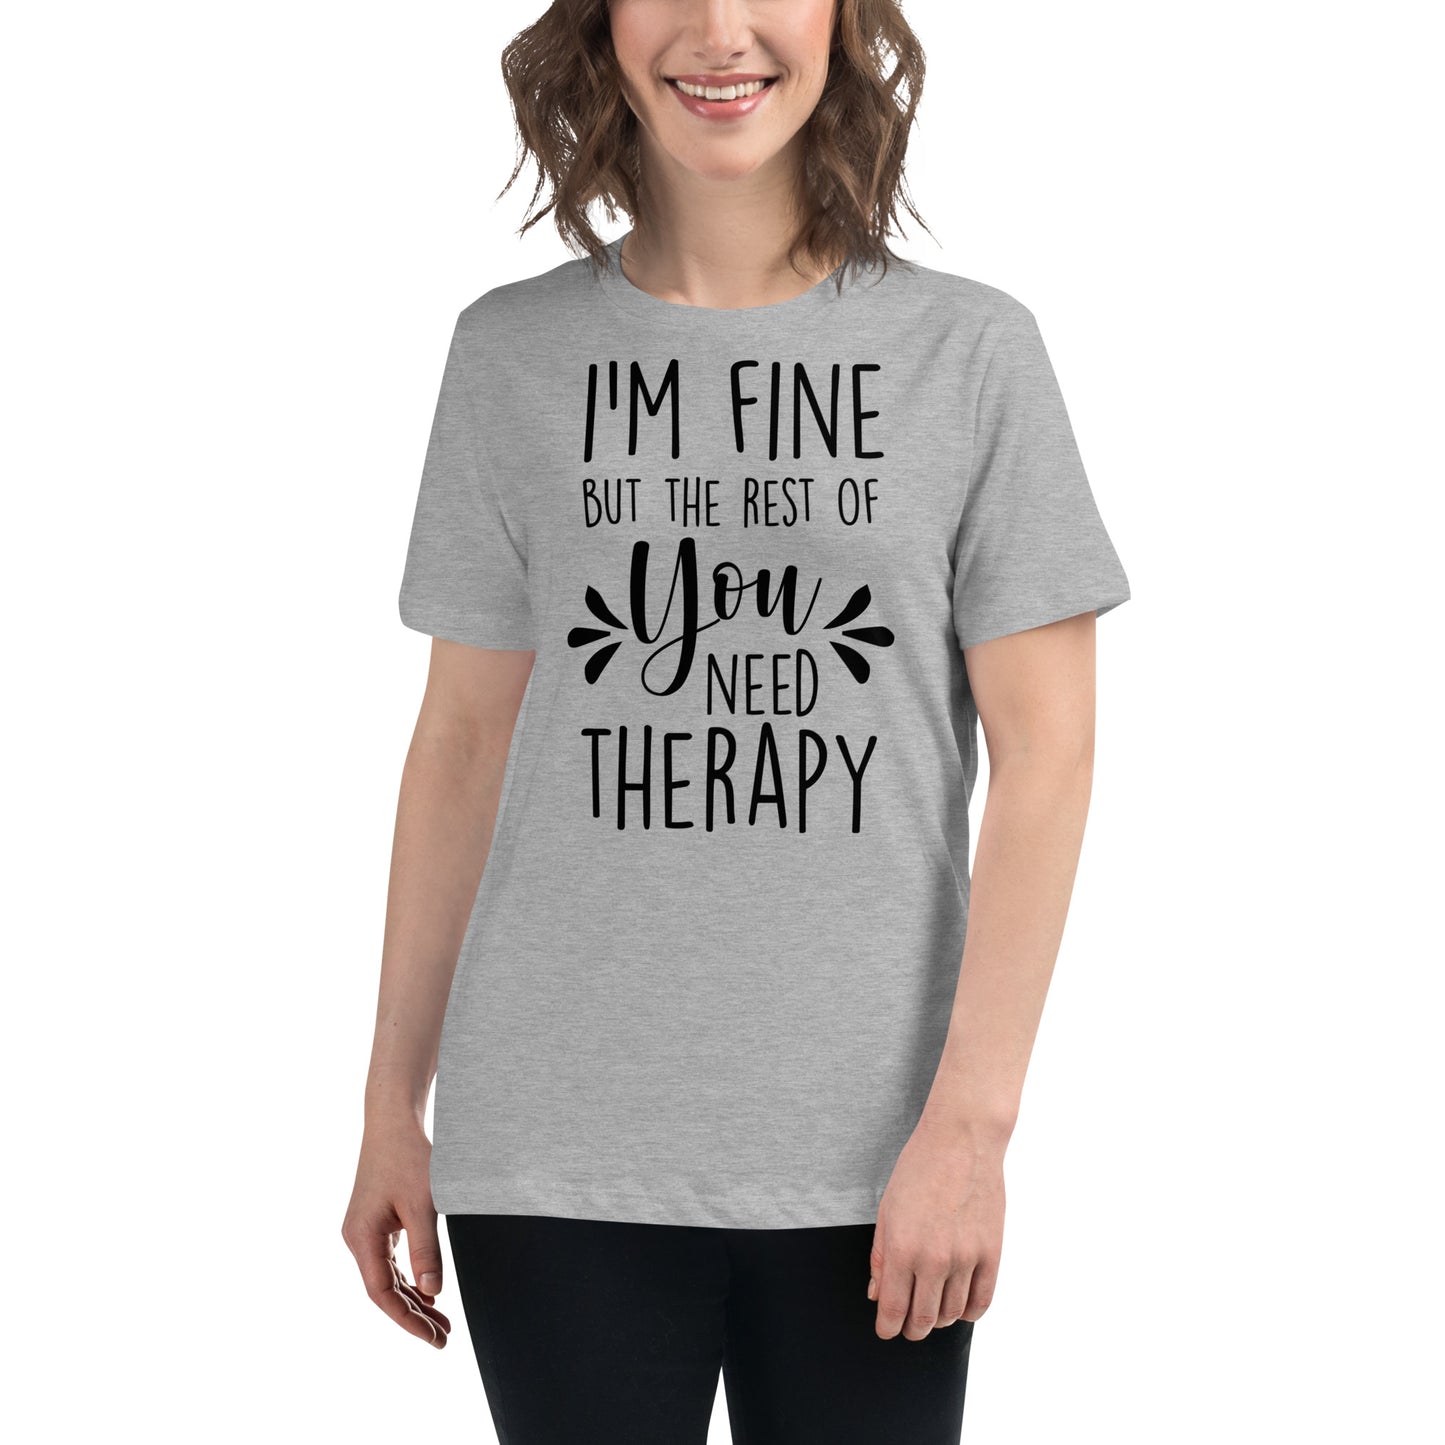 I'm Fine But the Rest of You Need Therapy Women's Relaxed T-Shirt